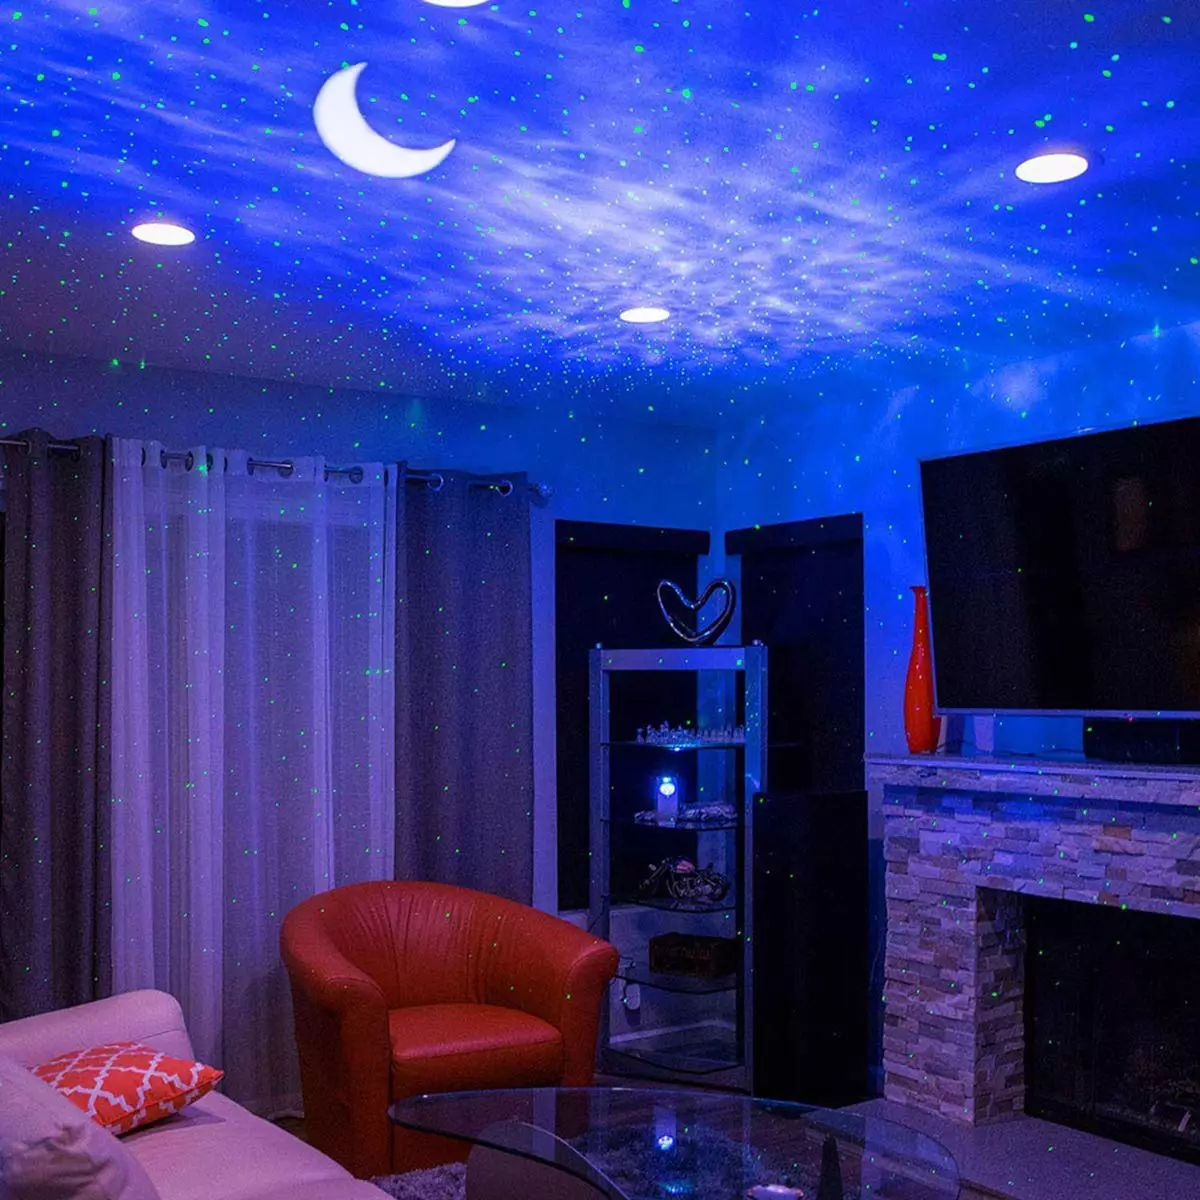 The LED Night Light projector features three different lighting effects including a romantic starry sky. (